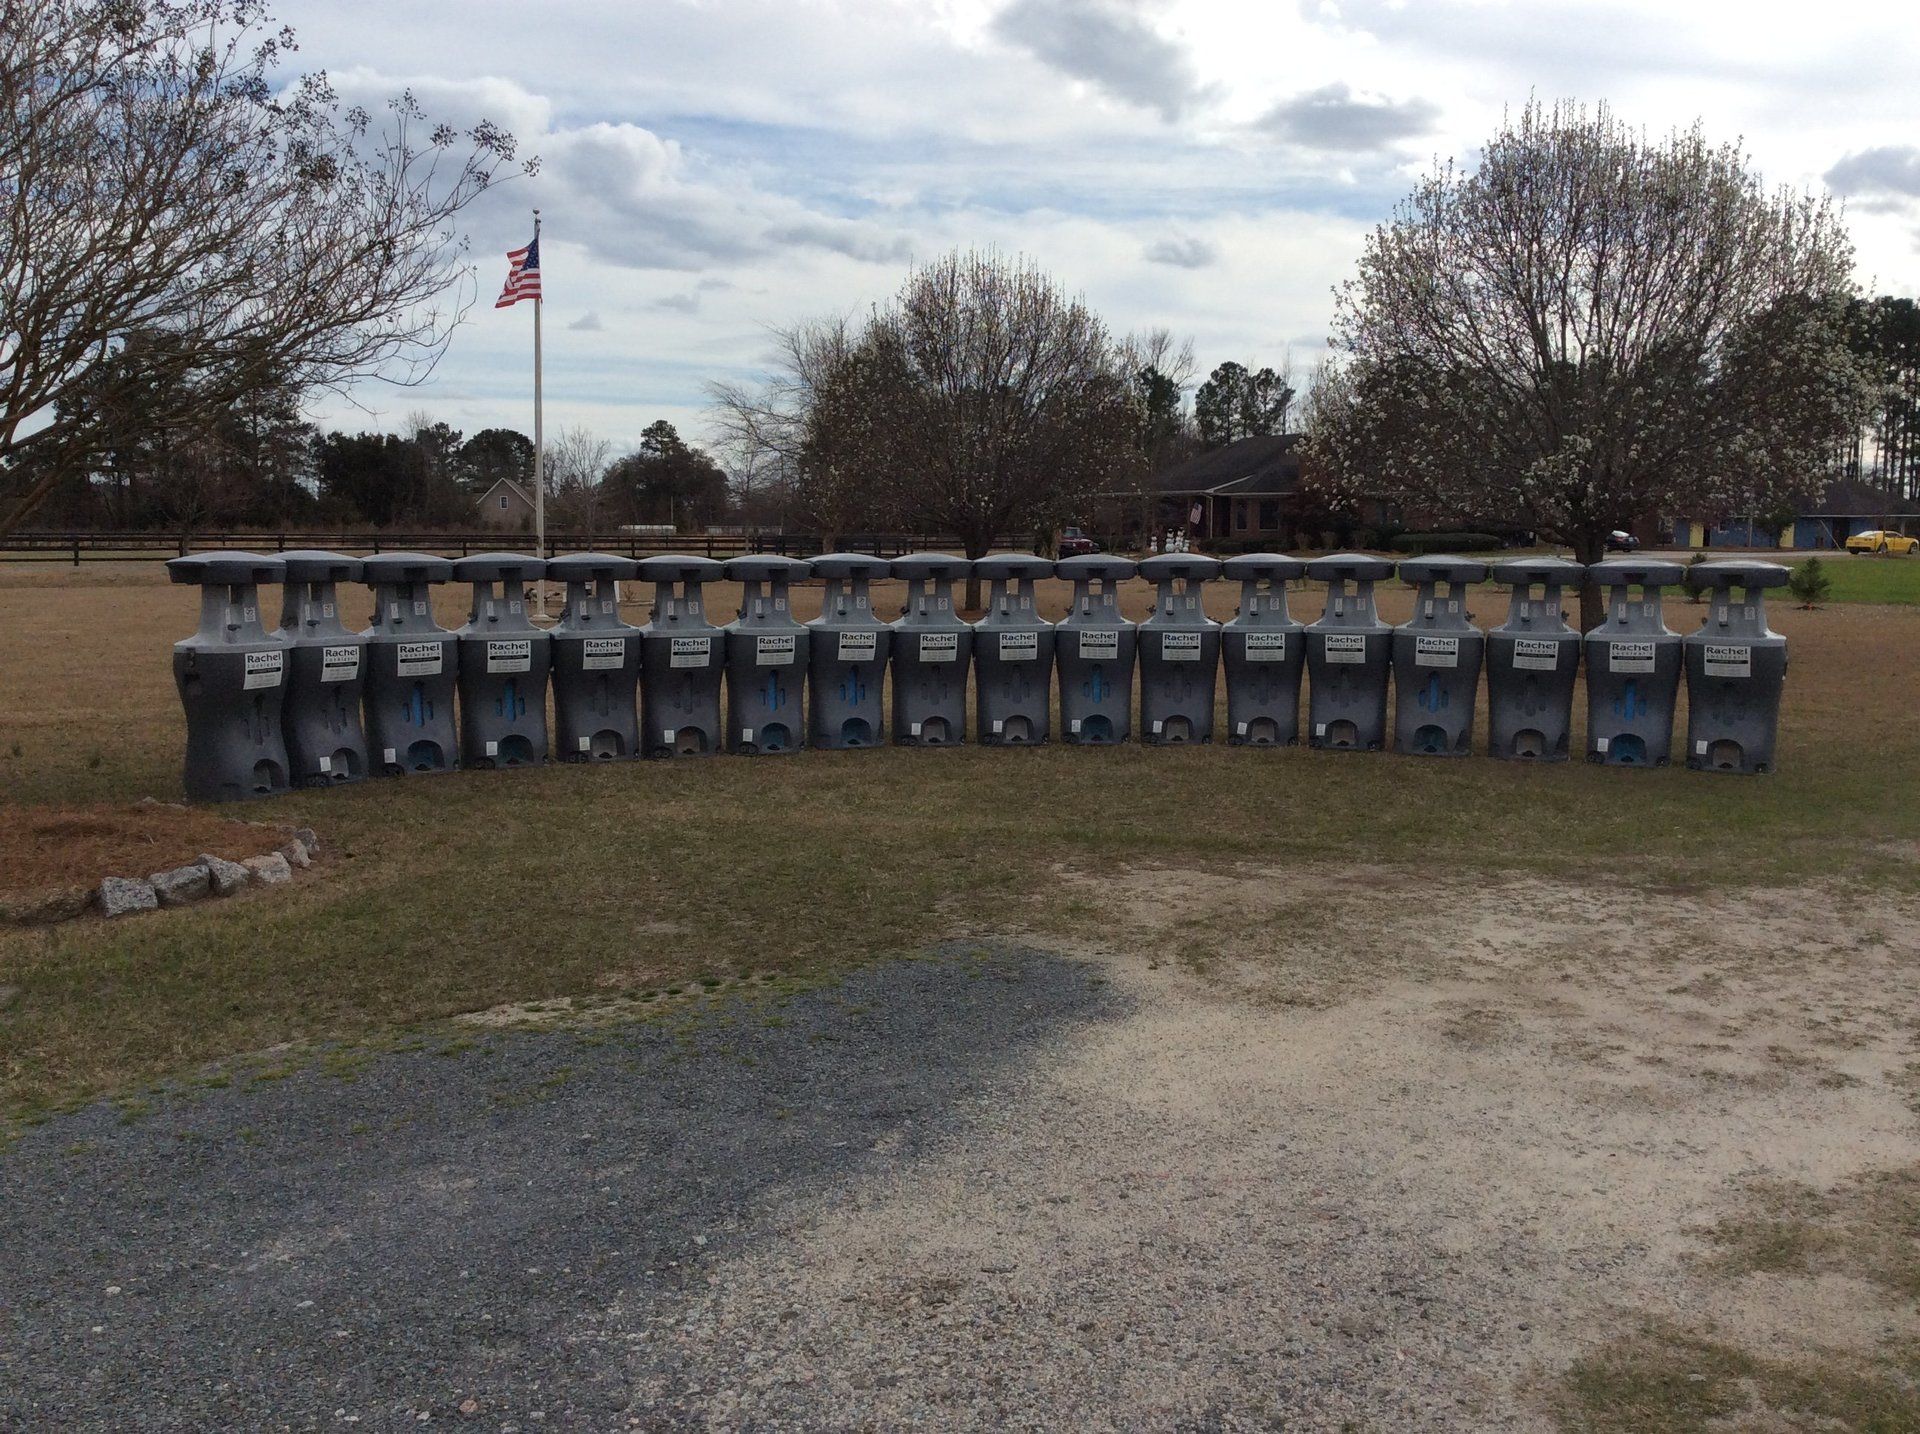 Portable Toilet Rentals in Fayetteville, NC